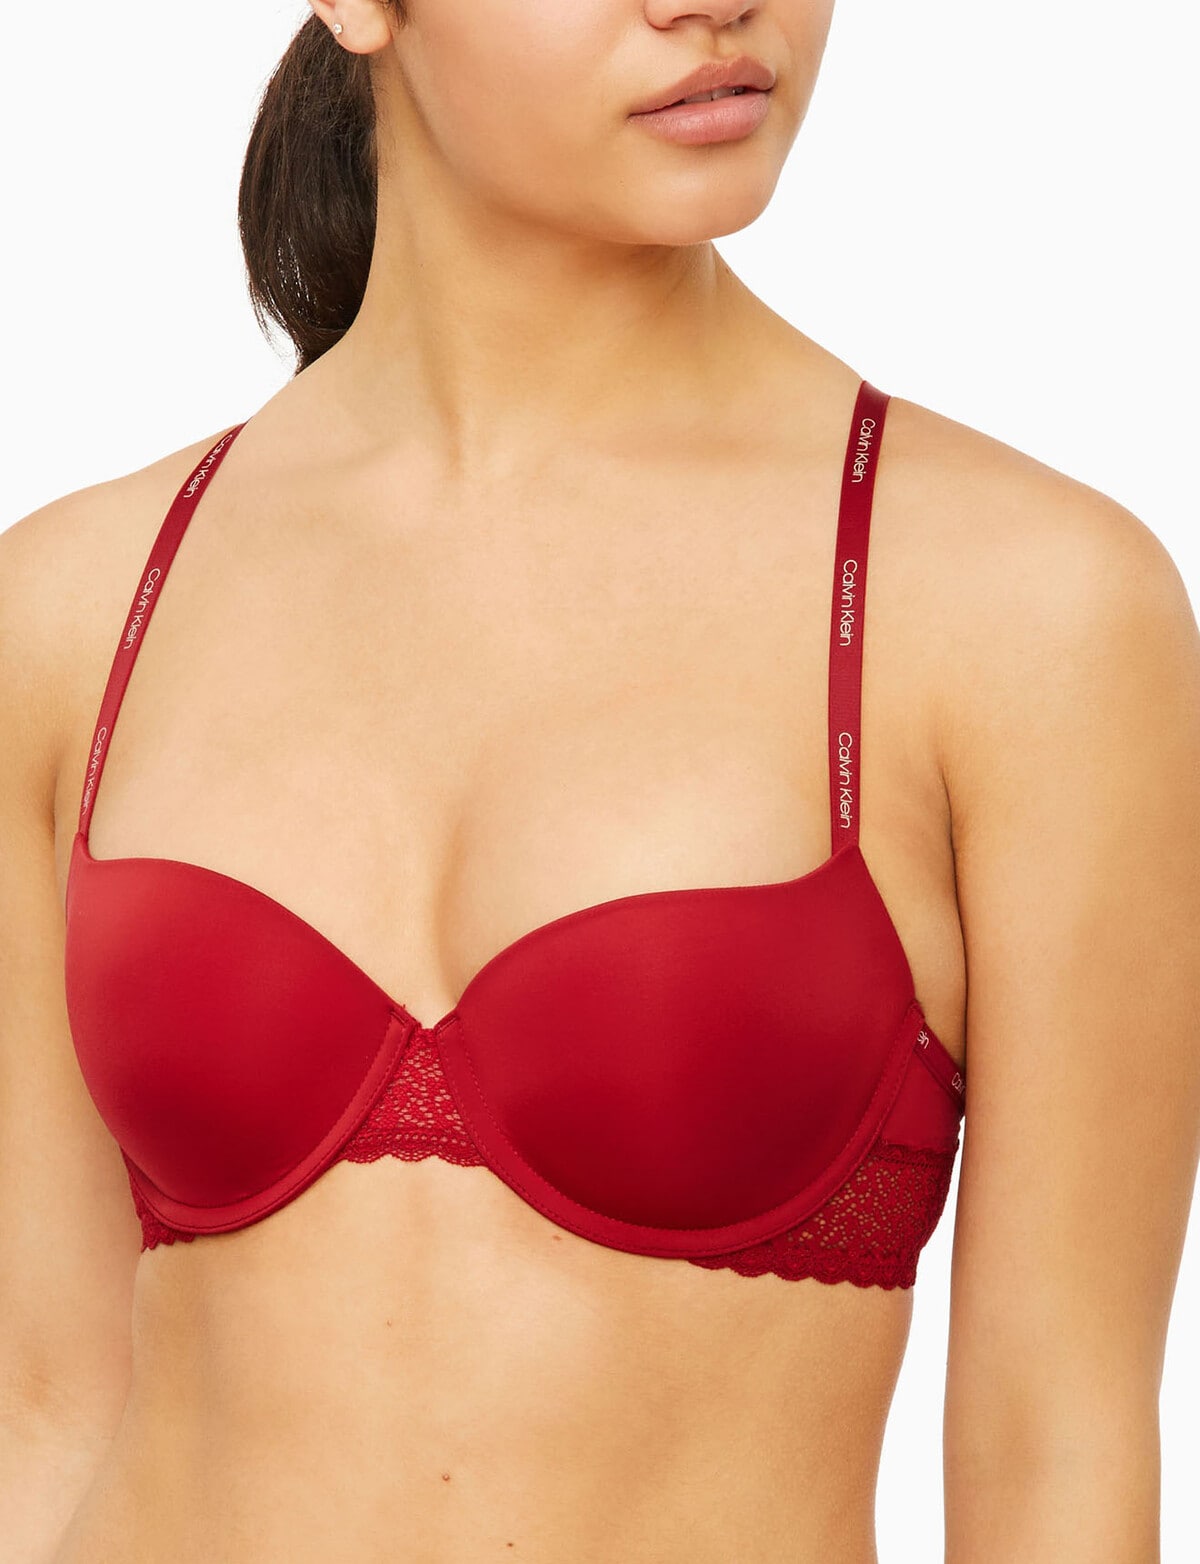 CK Black Linear Lace Lightly Lined Triangle Bra, red